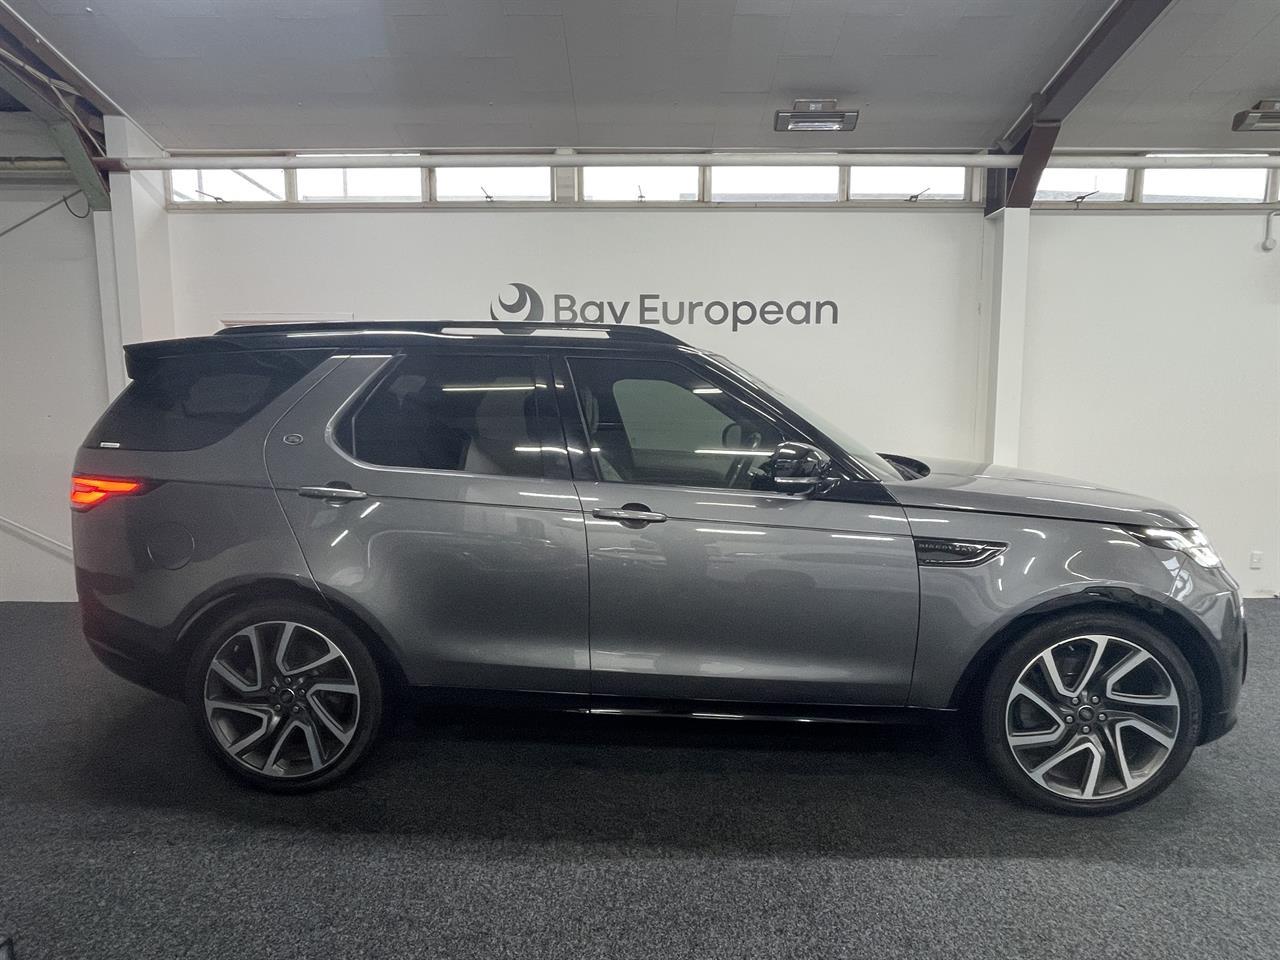 2018 Land Rover Discovery TD6 HSE Luxury 3.0D 7 Seater image 4